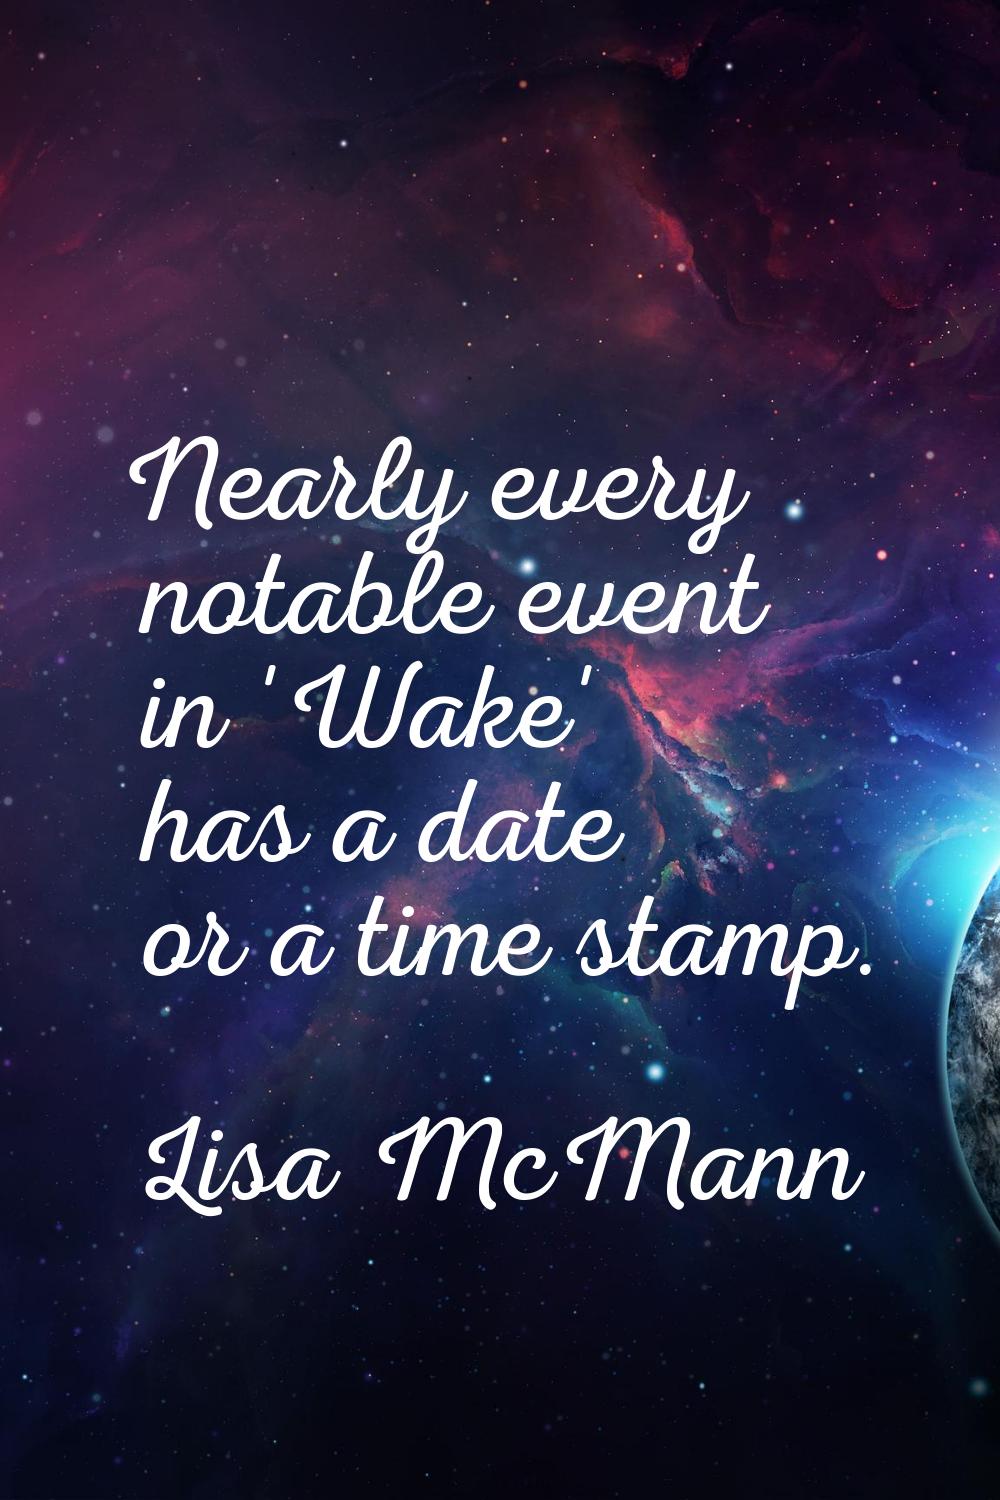 Nearly every notable event in 'Wake' has a date or a time stamp.